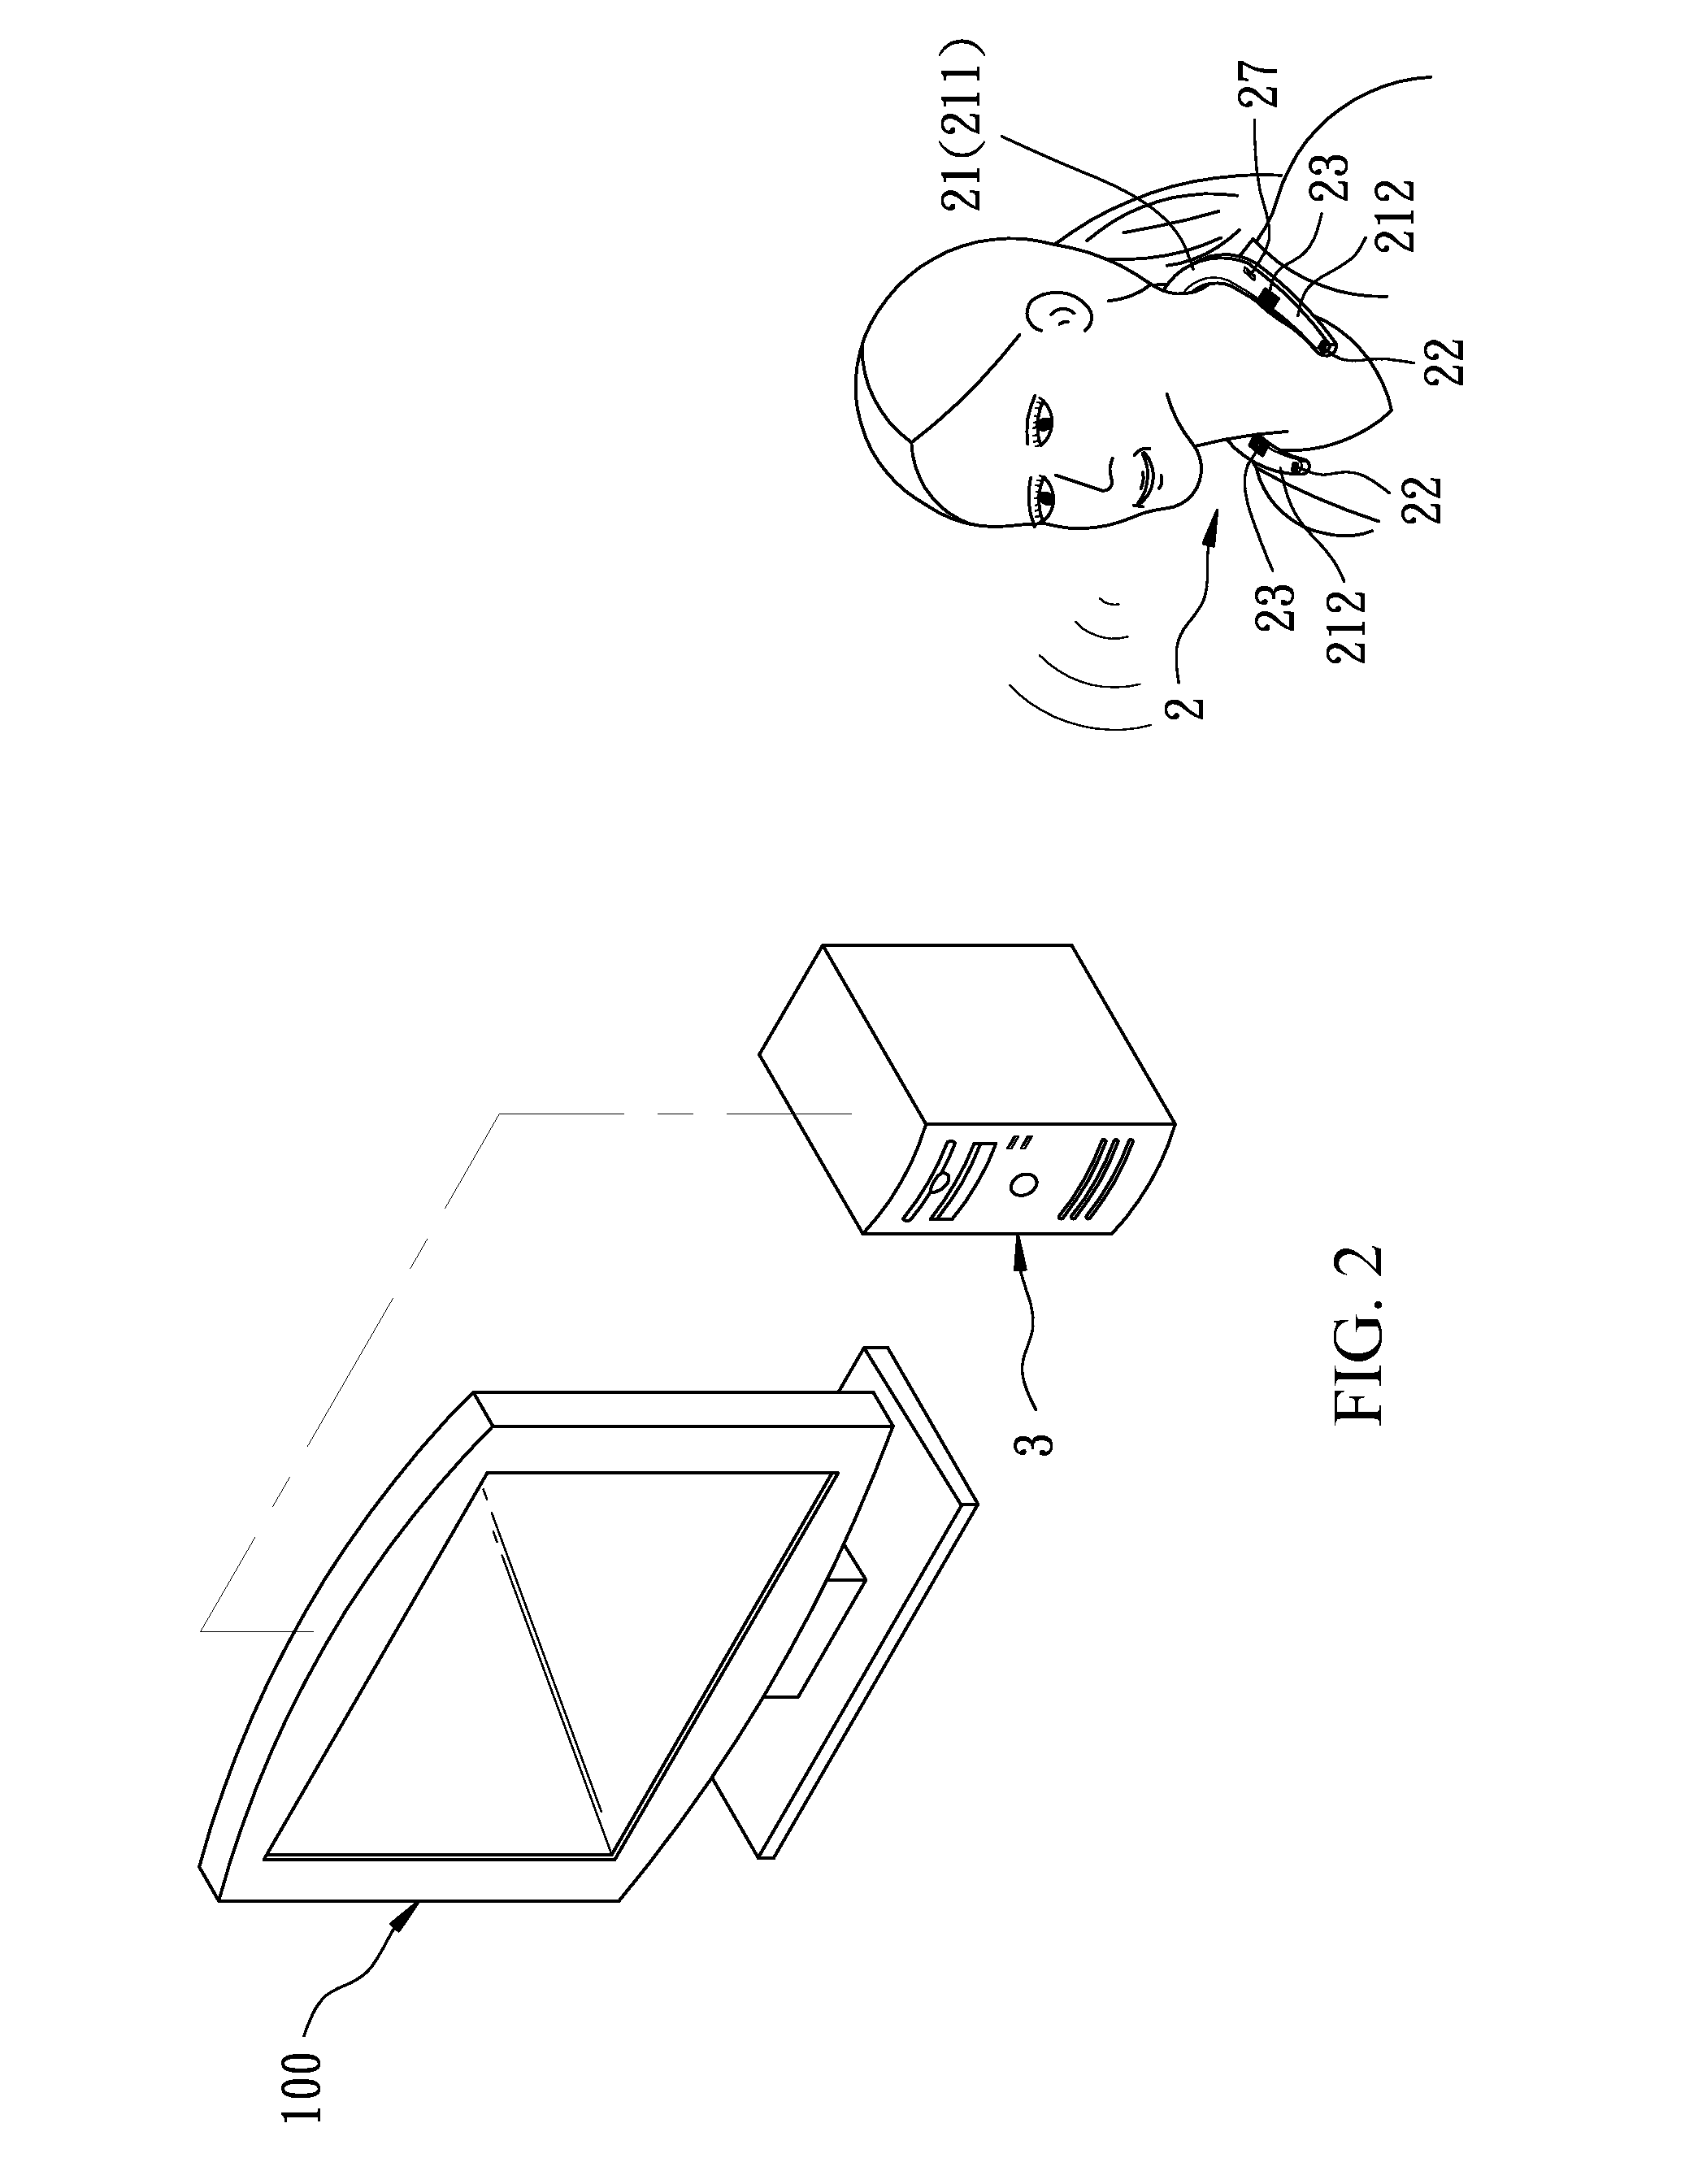 Voice control system with portable voice control device